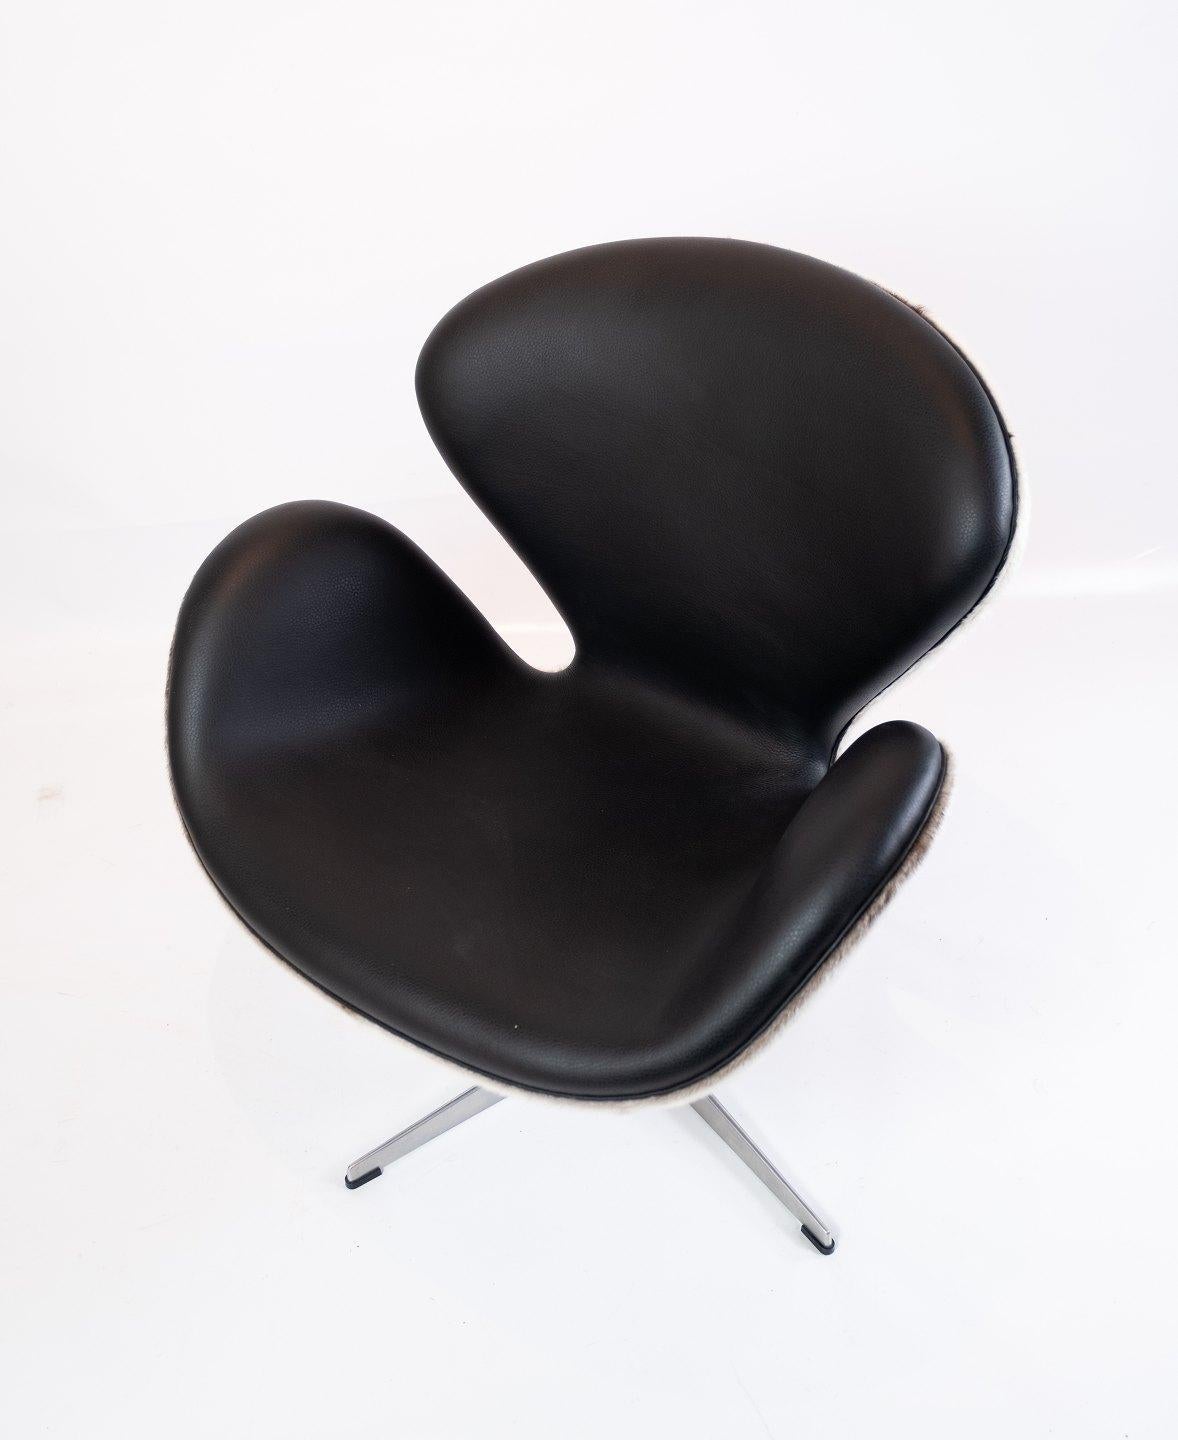 Swan chair, model 3320, designed by Arne Jacobsen in 1958 and manufactured by Fritz Hansen in 2002. The chair is with original upholstery in black leather and seal hide.
   